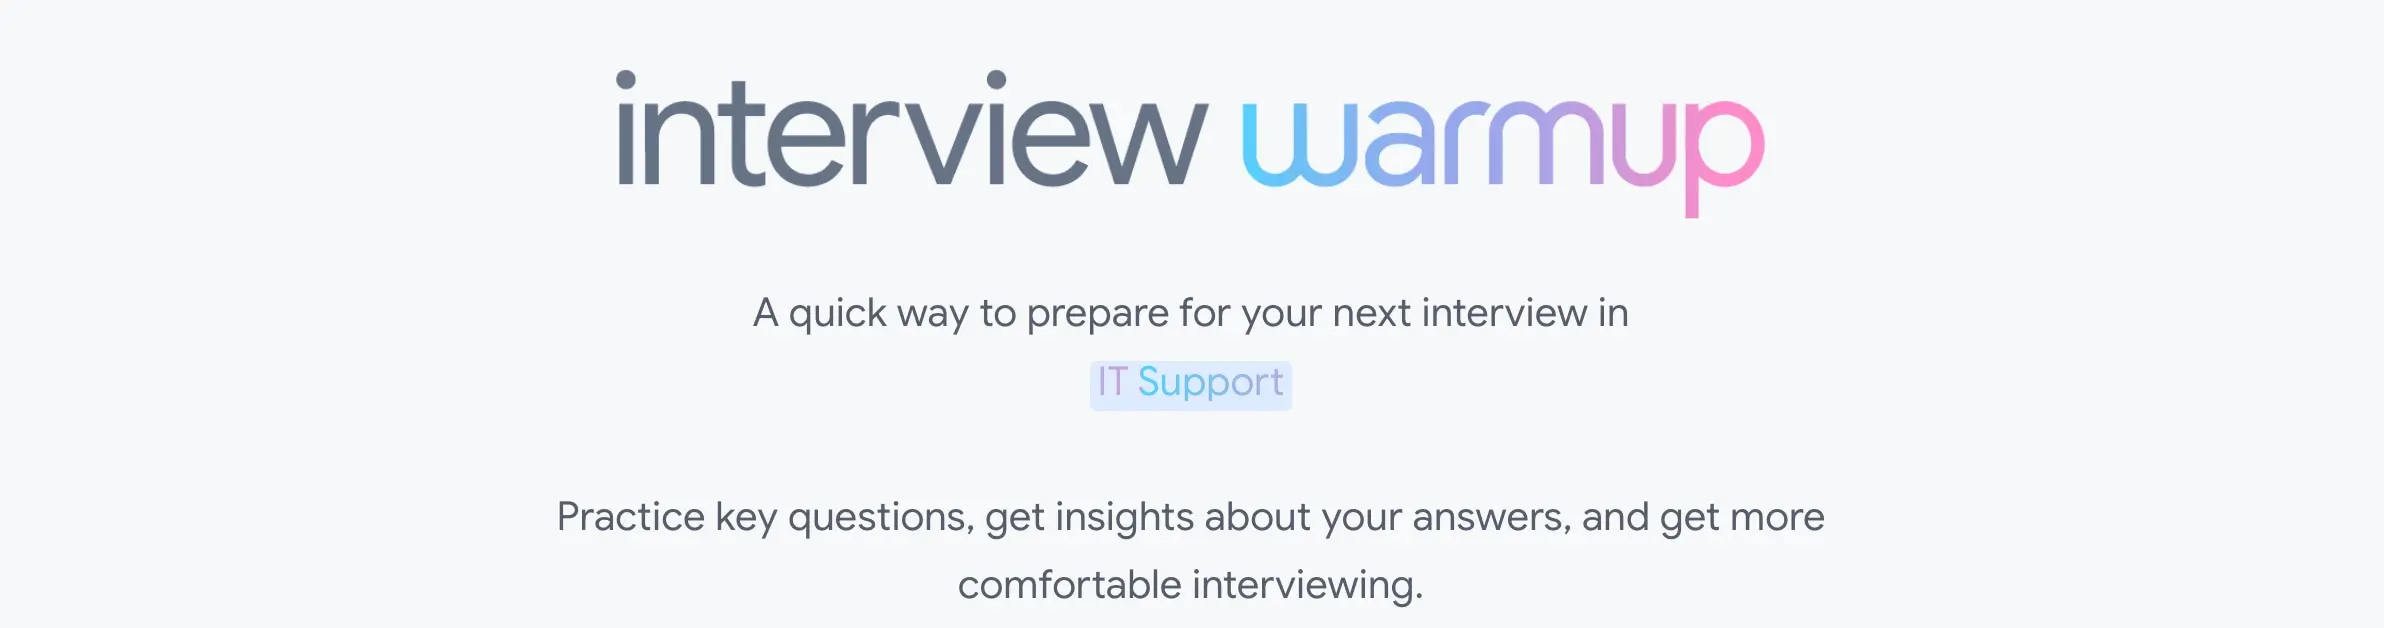 A screenshot from the interview warmup website, an AI job search tool